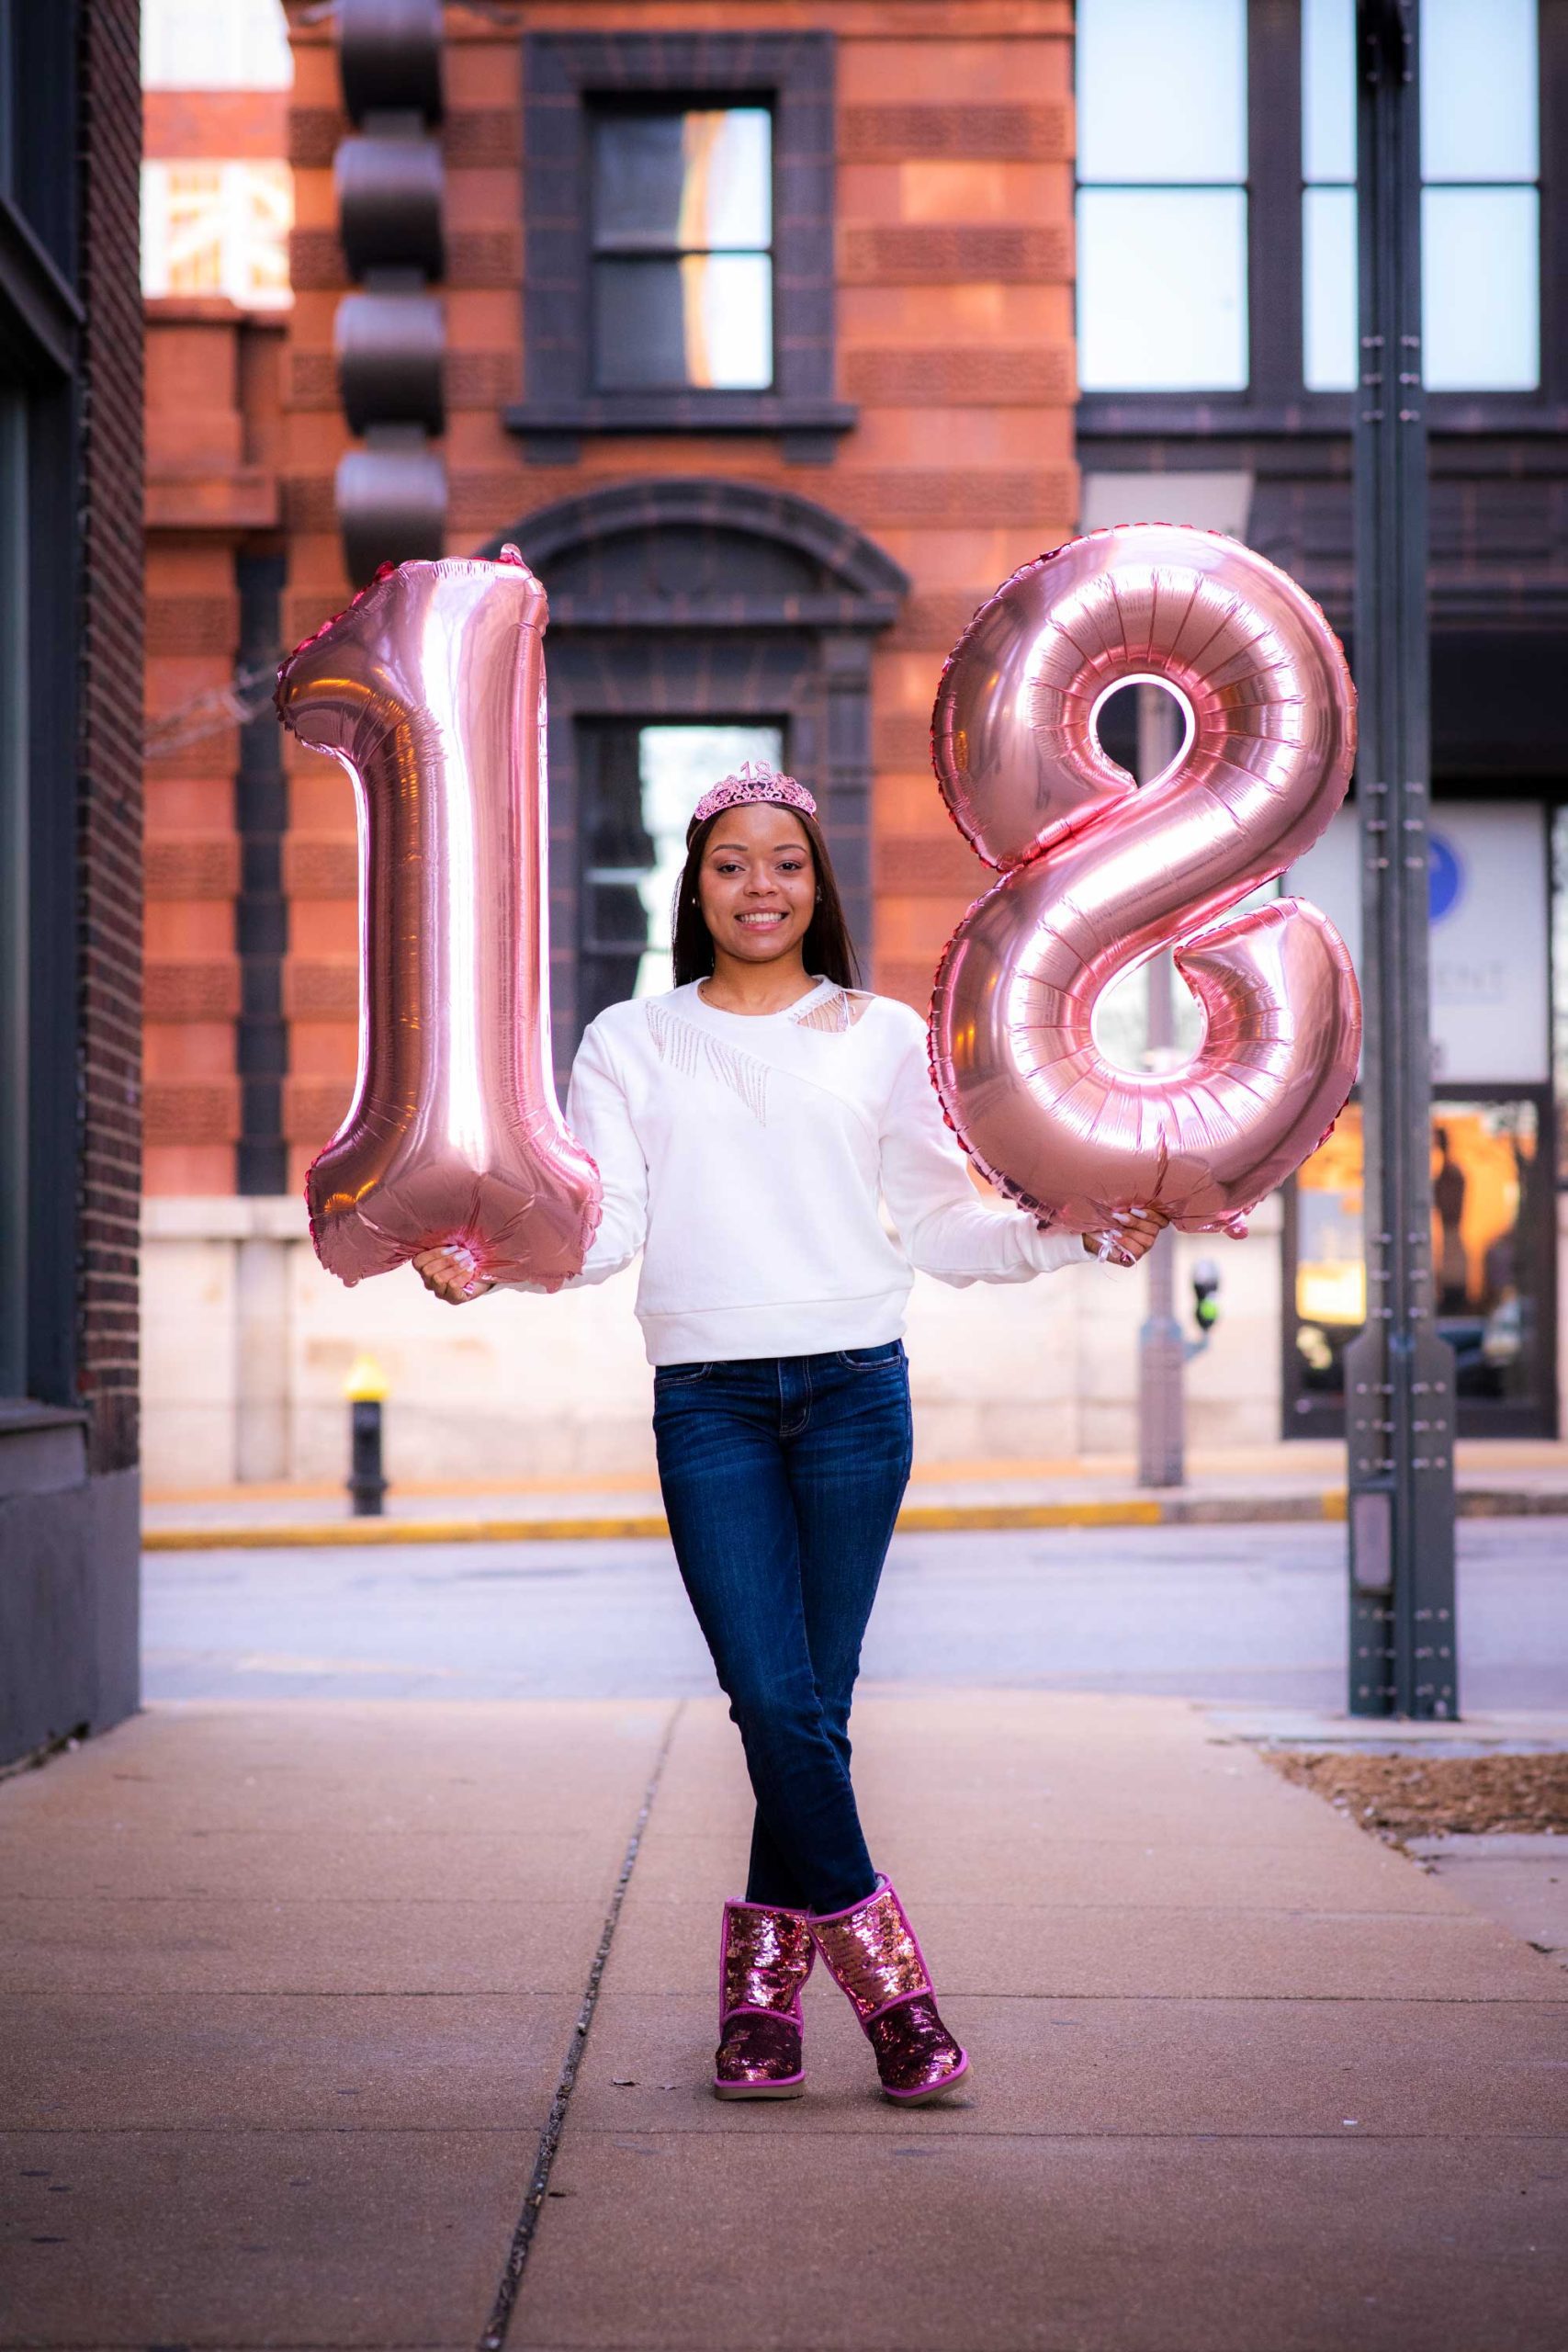 Girl in an urban setting holding up large number balloons that say "18" in celebration of her 18th birthday.